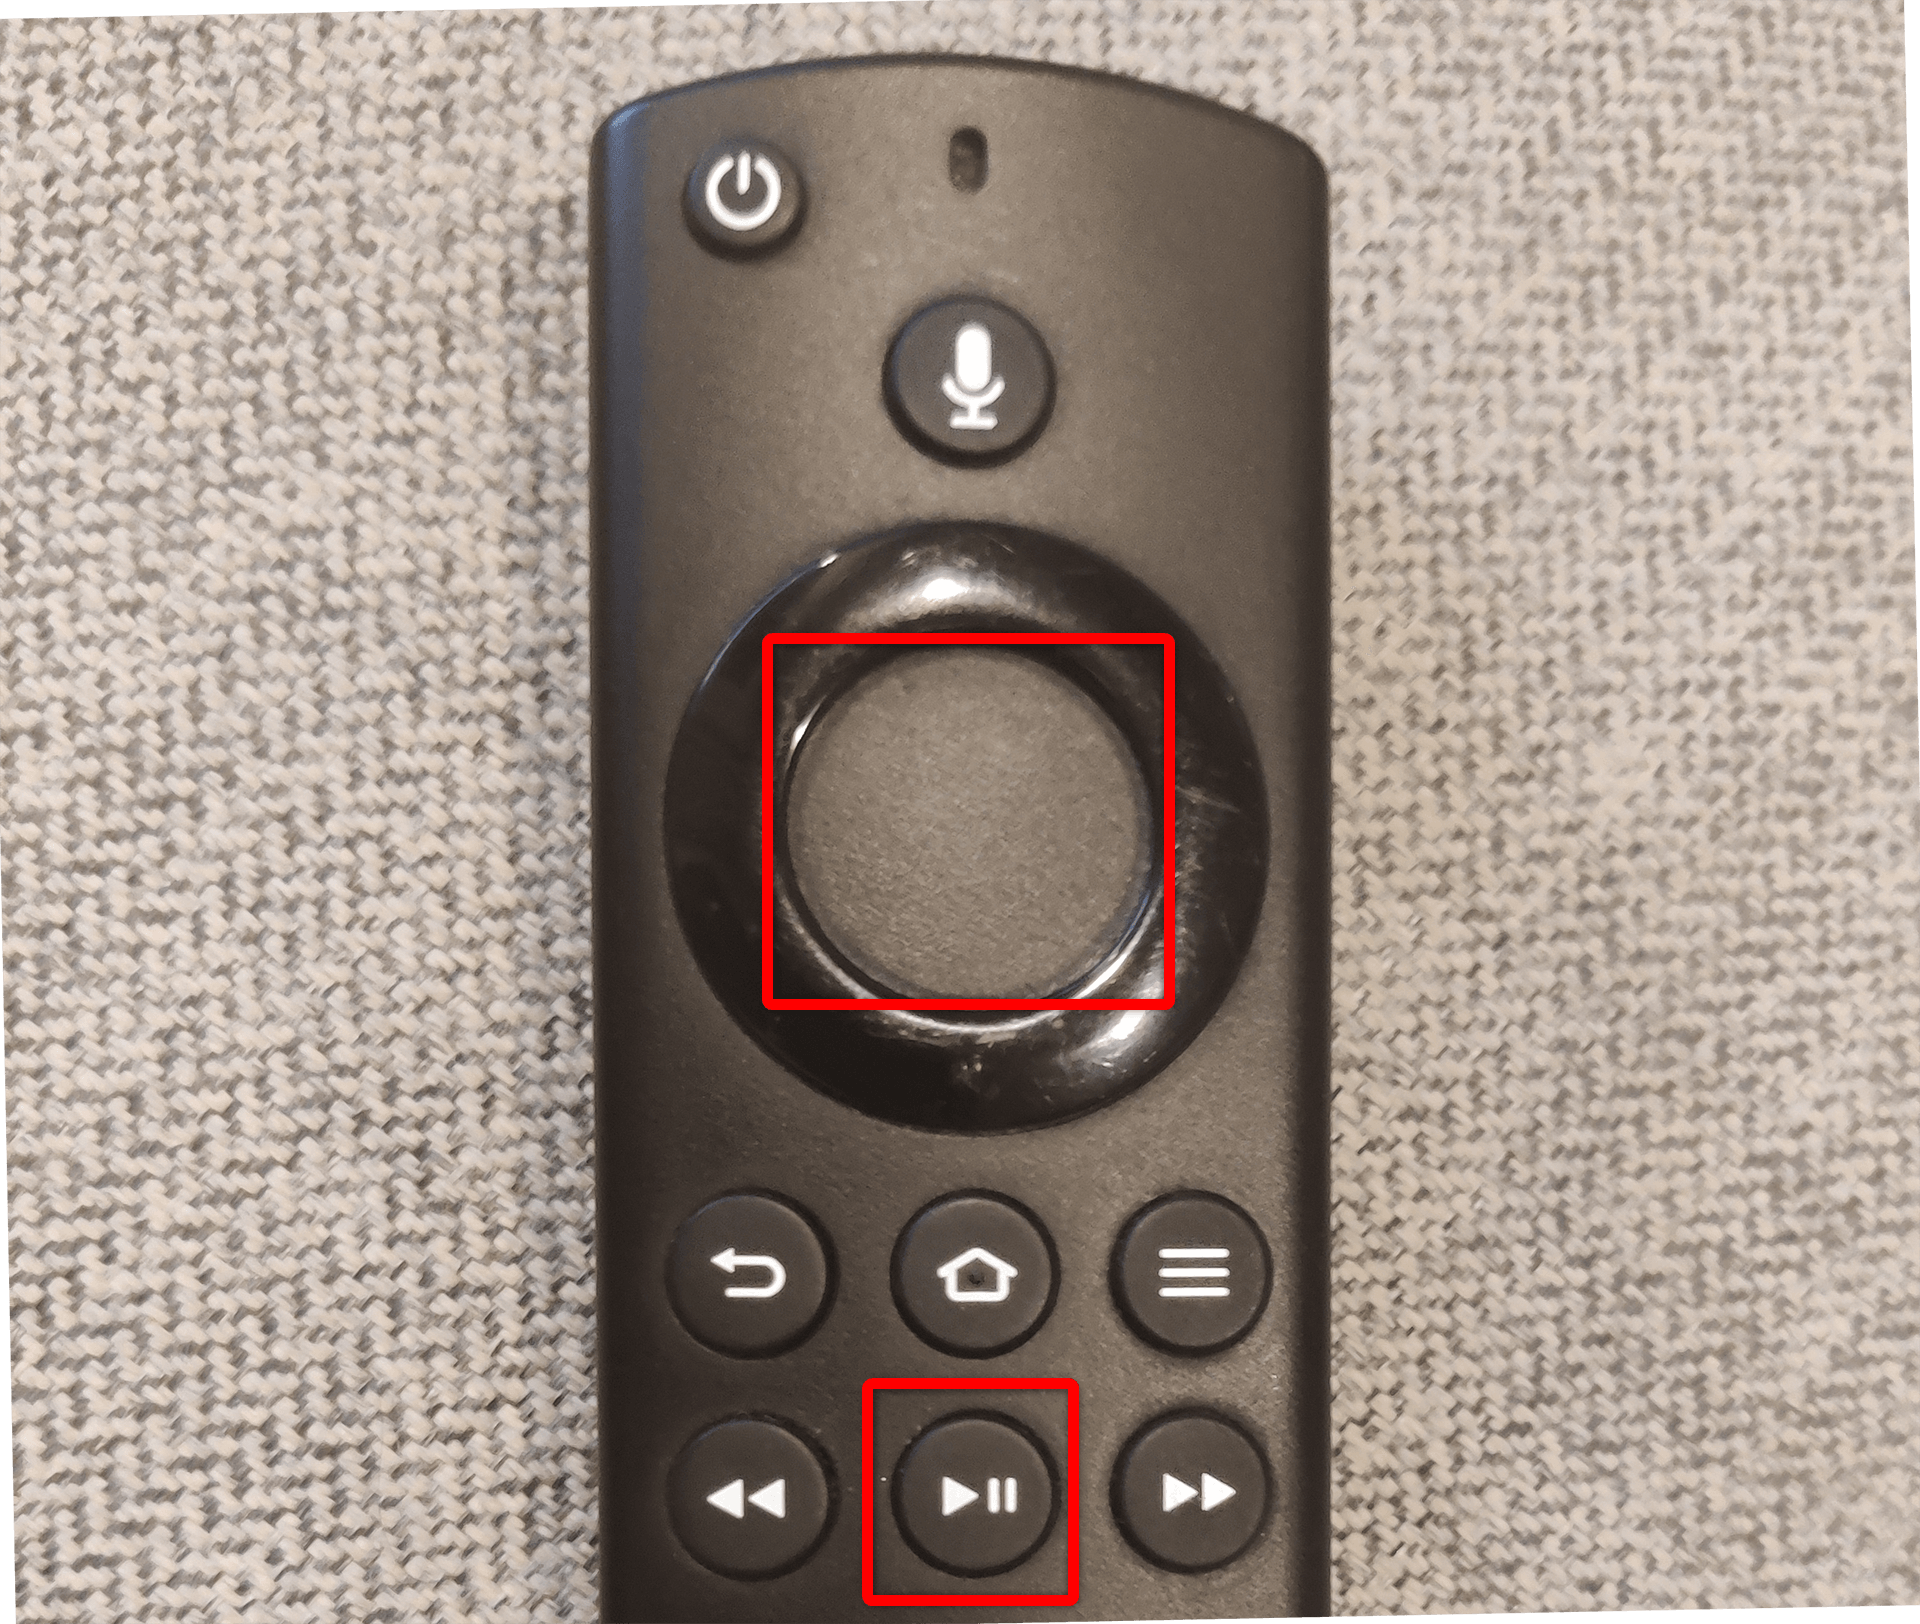 Select and Play/Pause buttons highlighted on an Amazon Fire TV Stick remote.